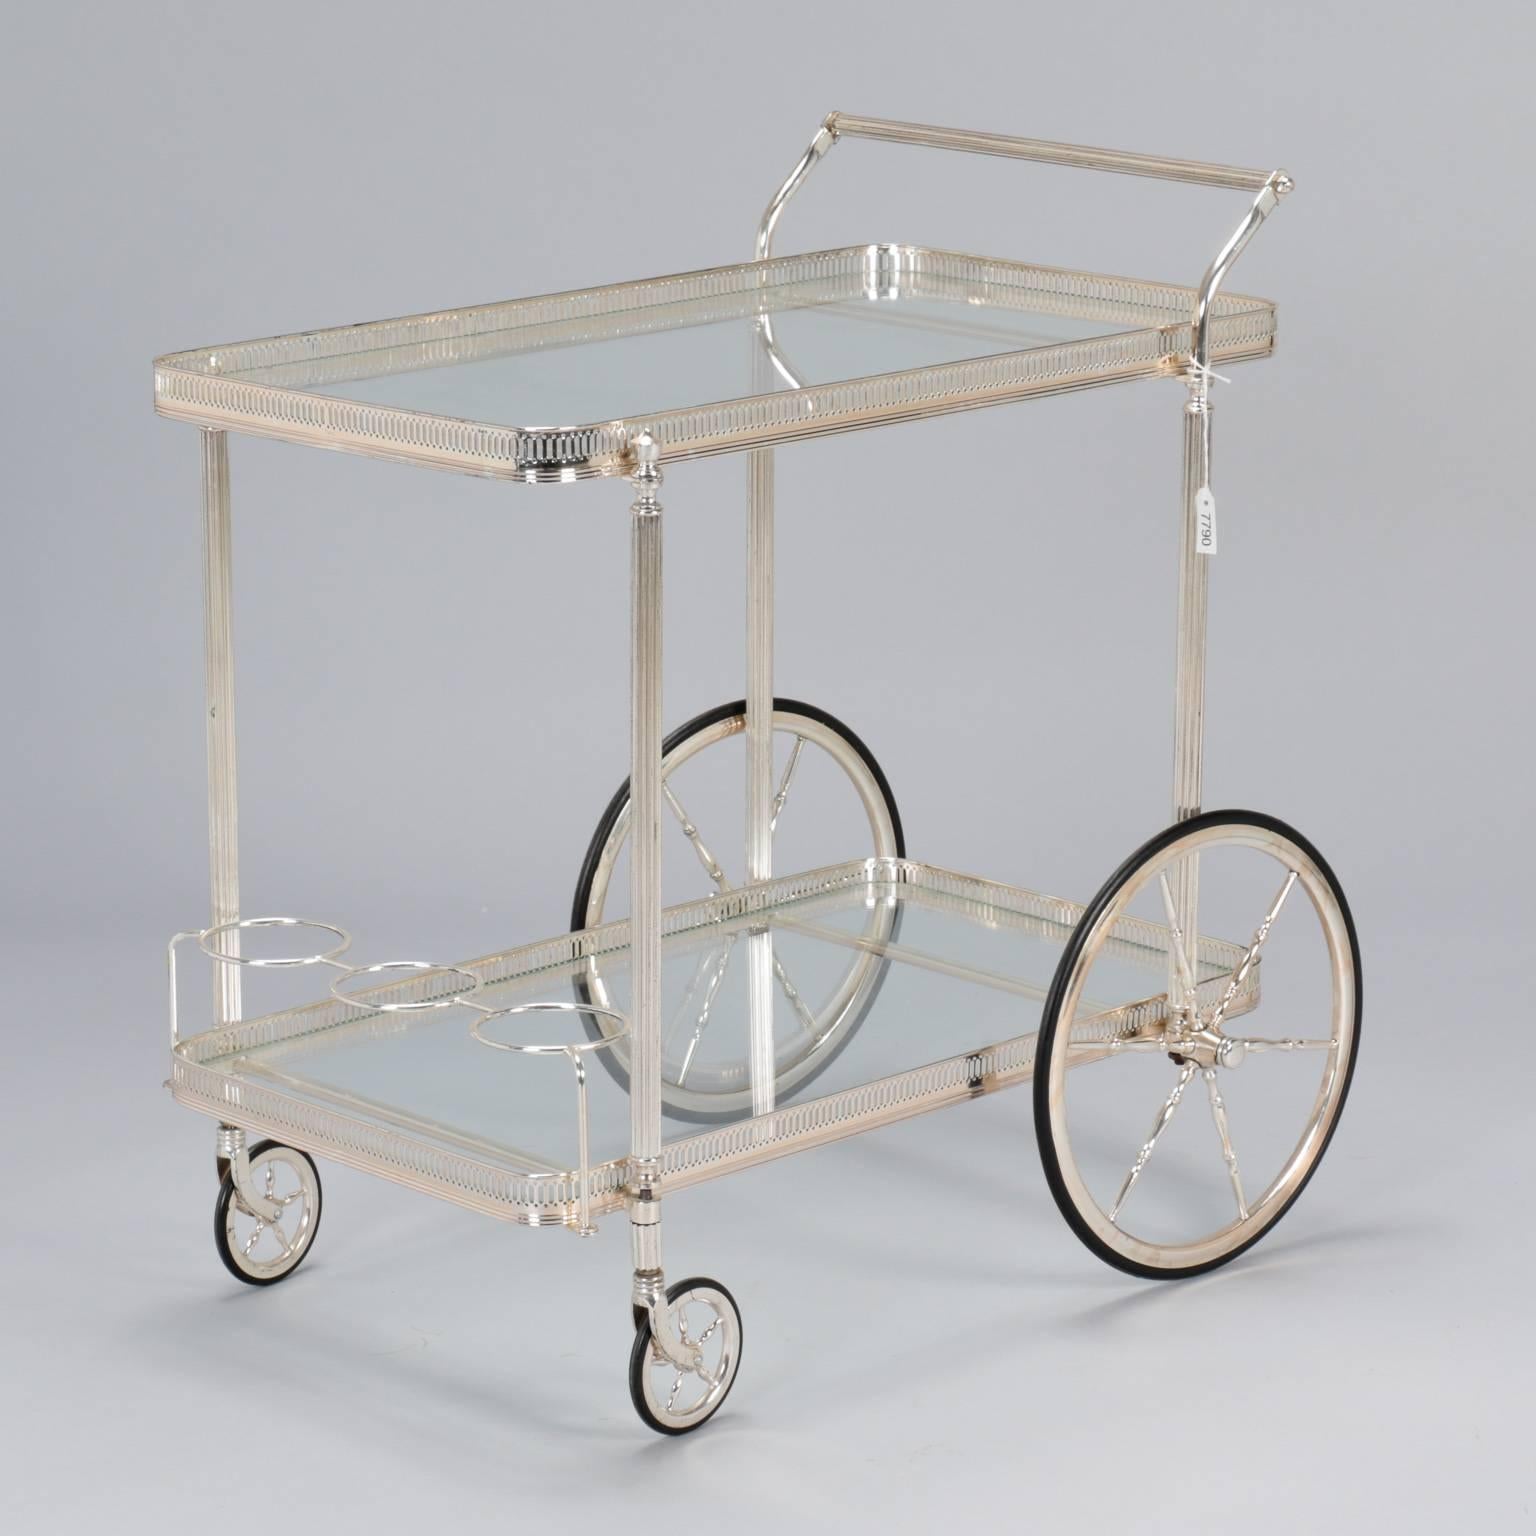 Found in France, this midcentury trolley or bar cart dates from the 1960s. Metal cart has a polished nickel finish, two glass shelves with galleries, bottle holders on the lower level, and reeded legs. 

